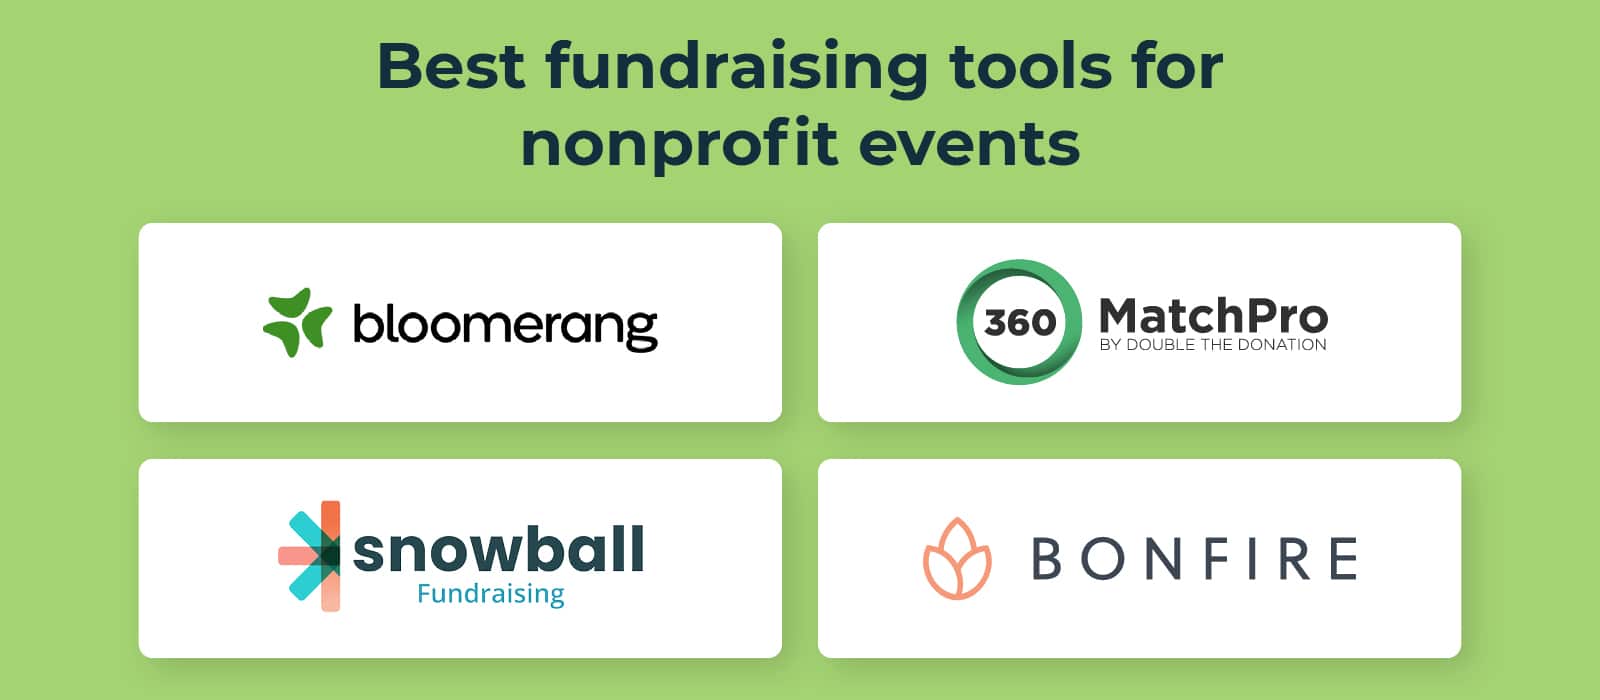 Logos for the event fundraising tools listed below